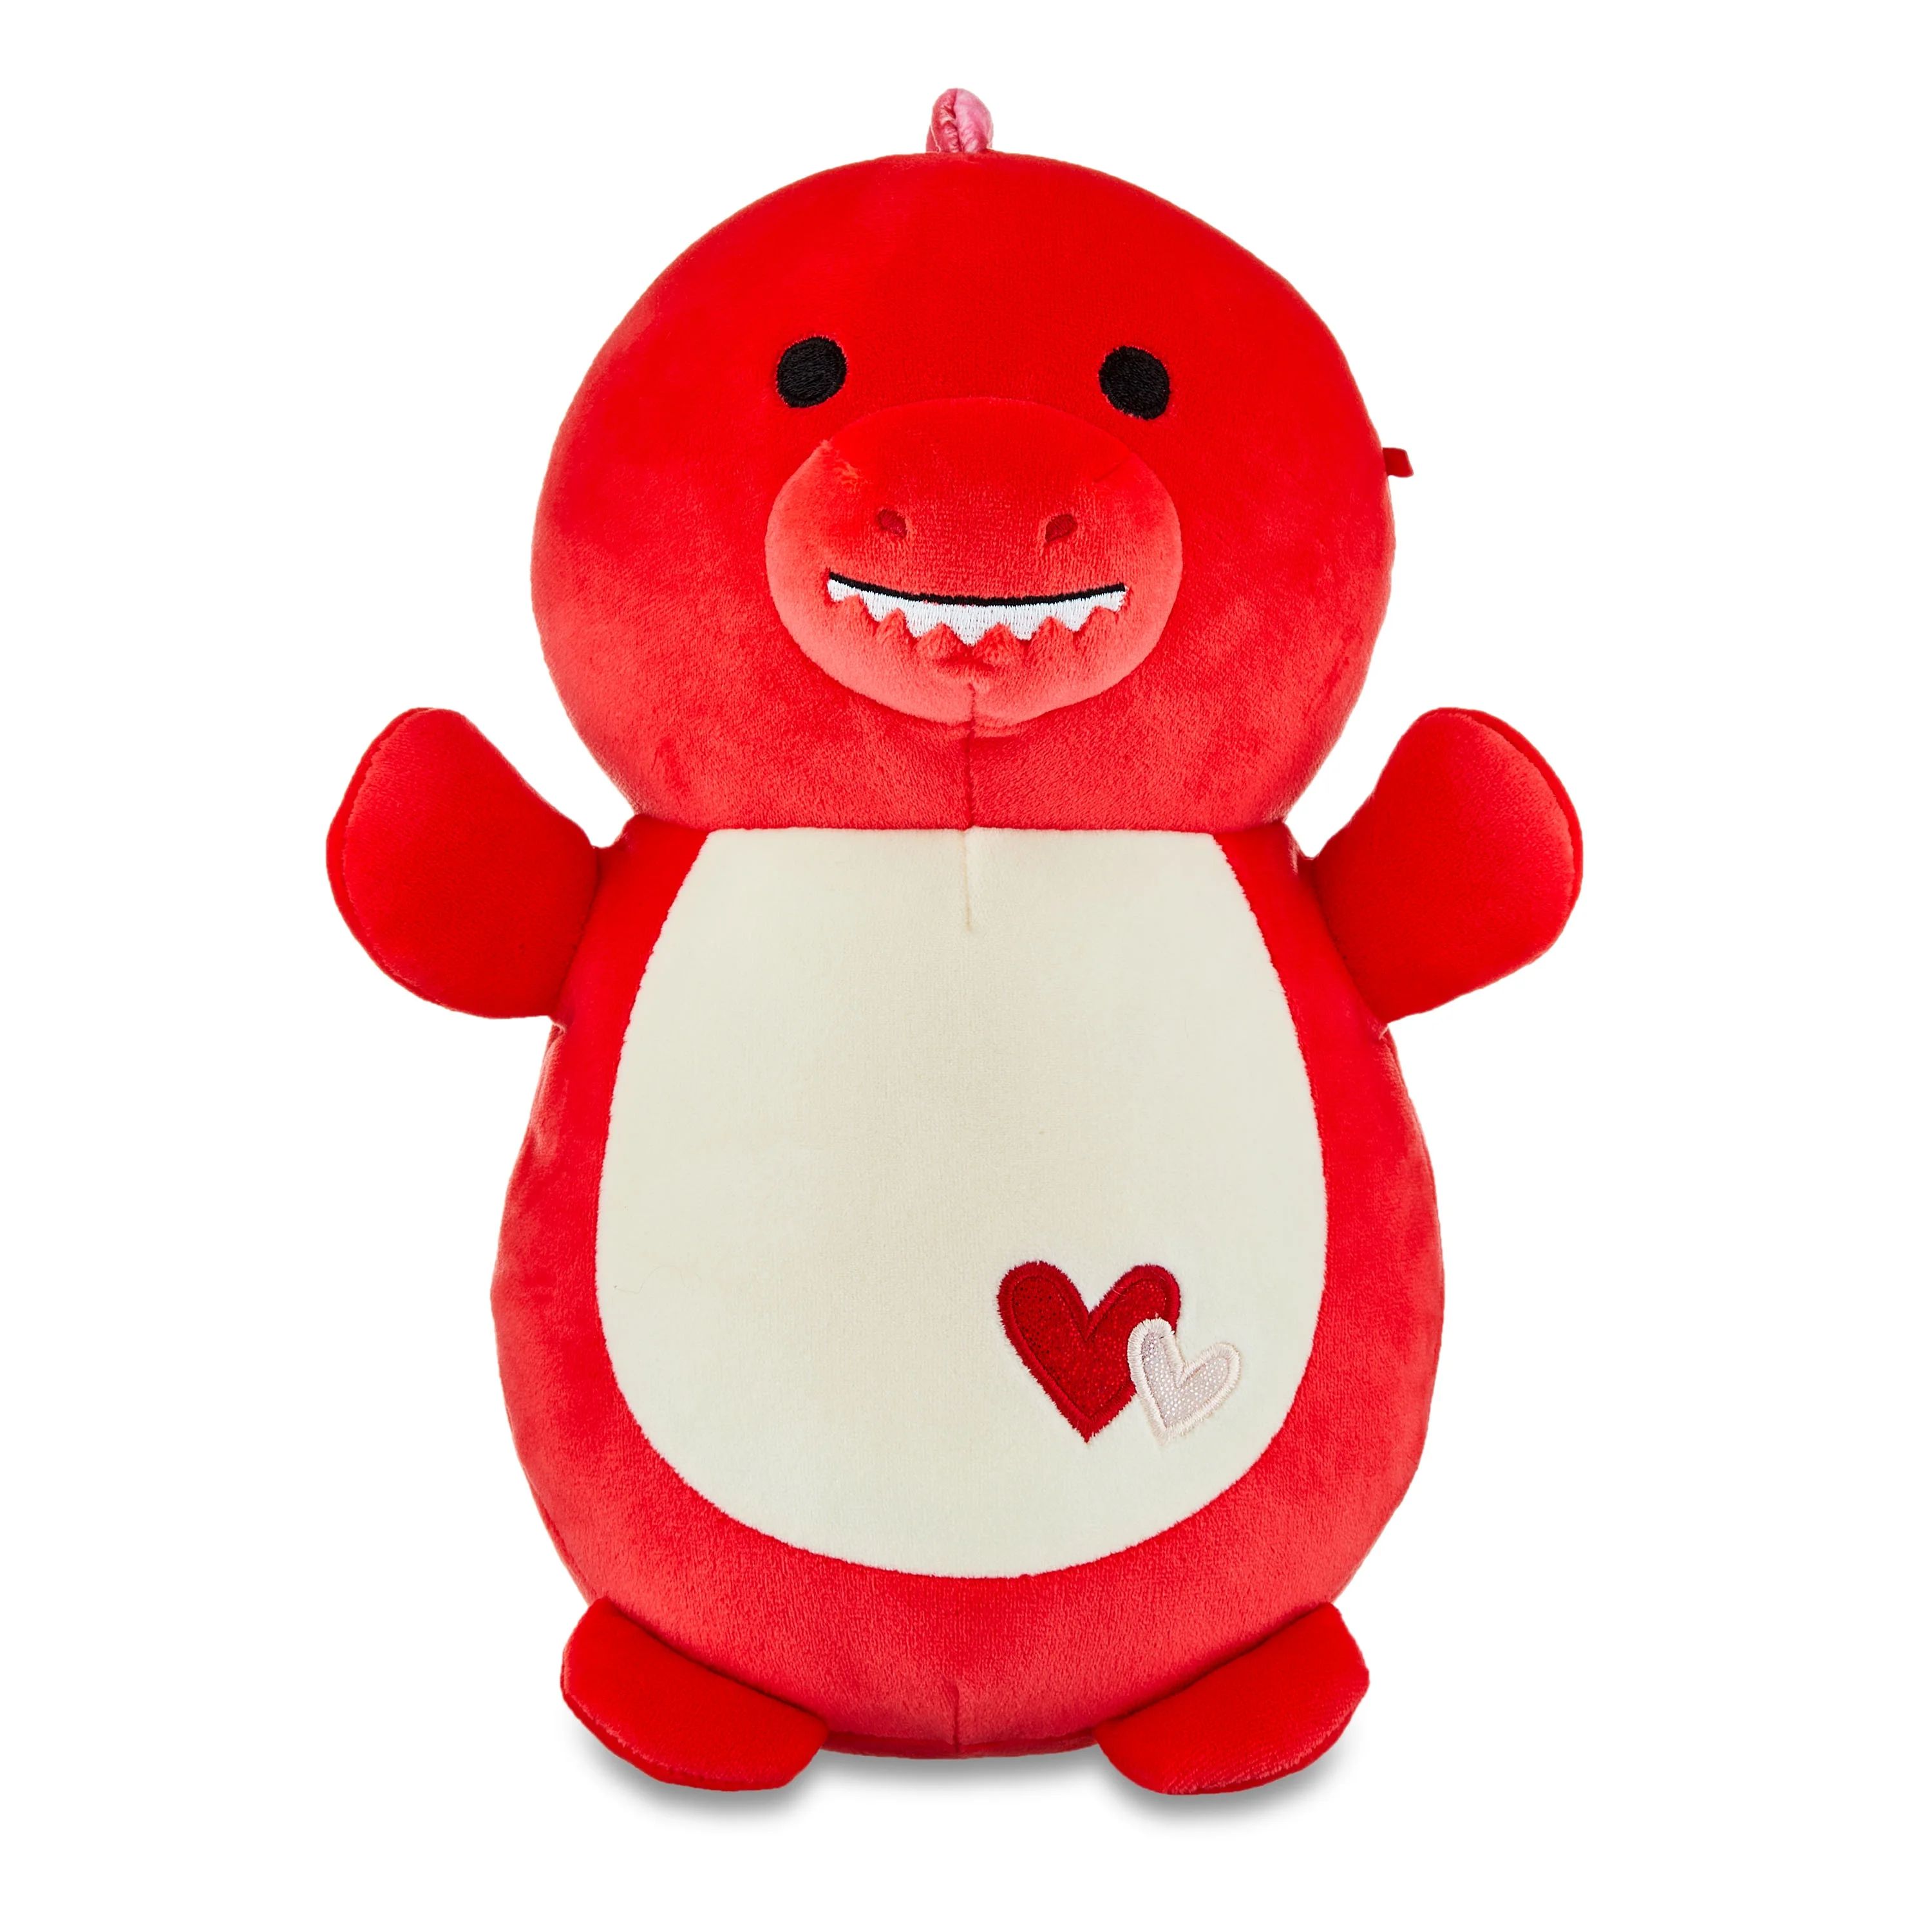 Squishmallows Official Hugmee Plush 10 inch Red Dino - Child's Ultra Soft Stuffed Plush Toy | Walmart (US)